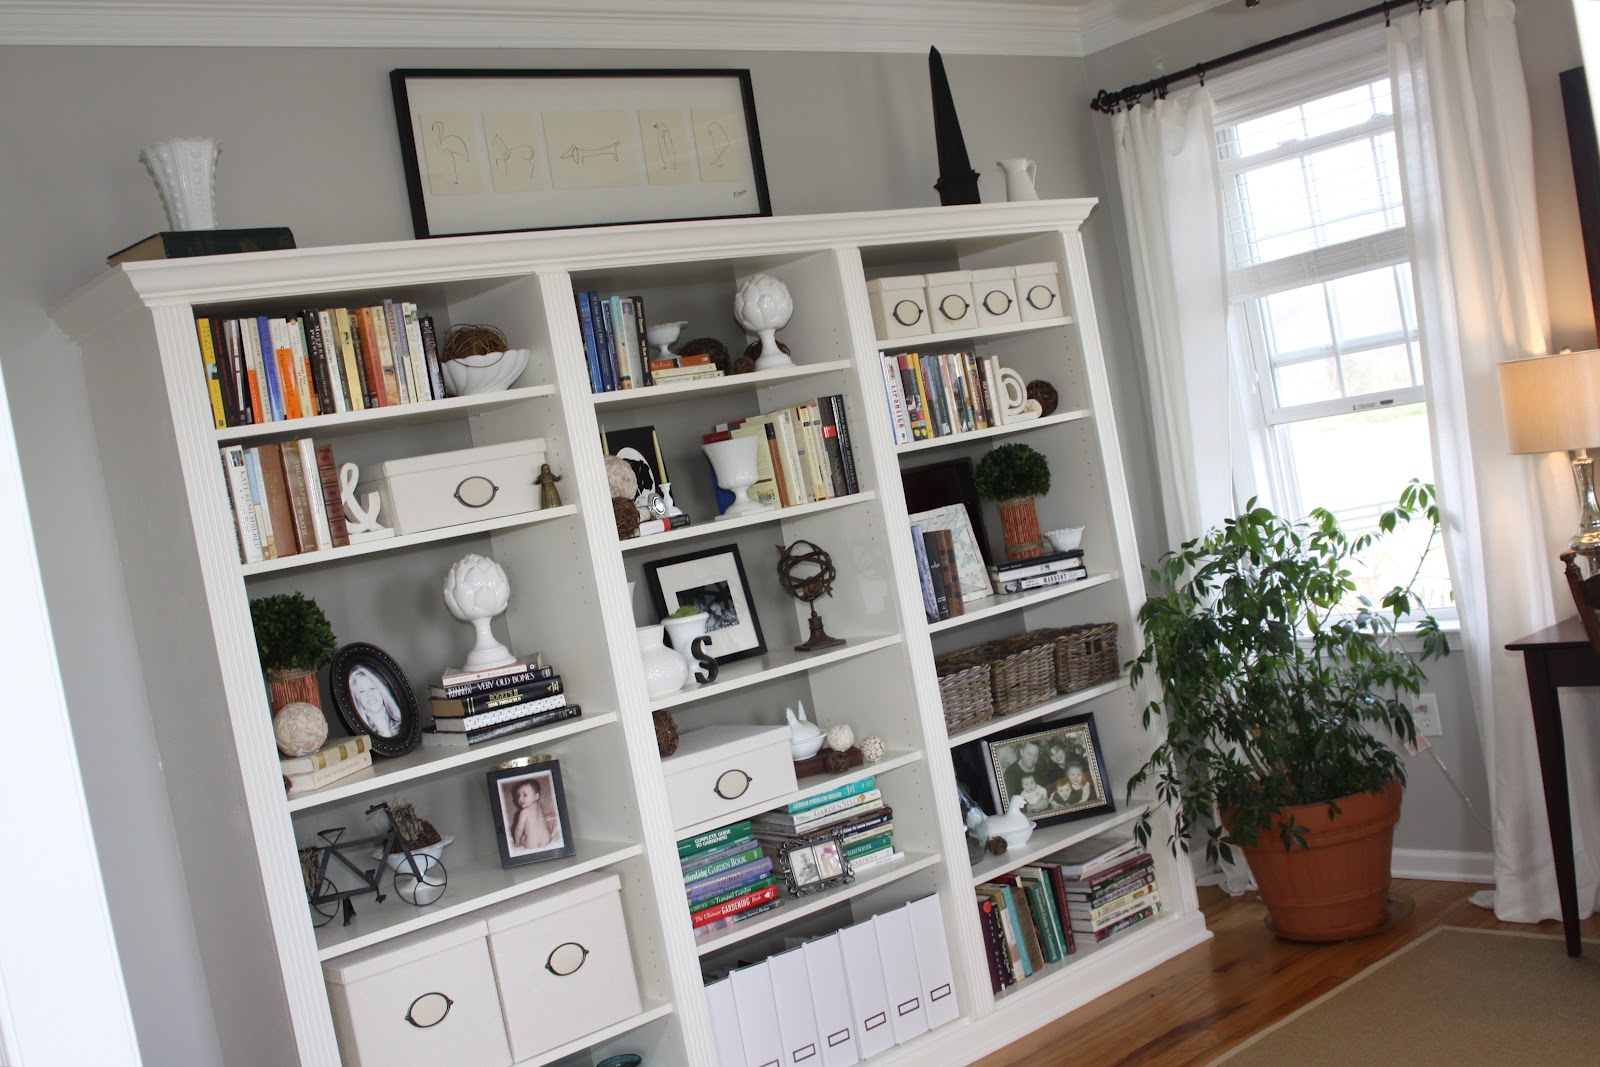 Reinventing Eden: From Ikea Billy Bookcase to Built-in Gorgeousness